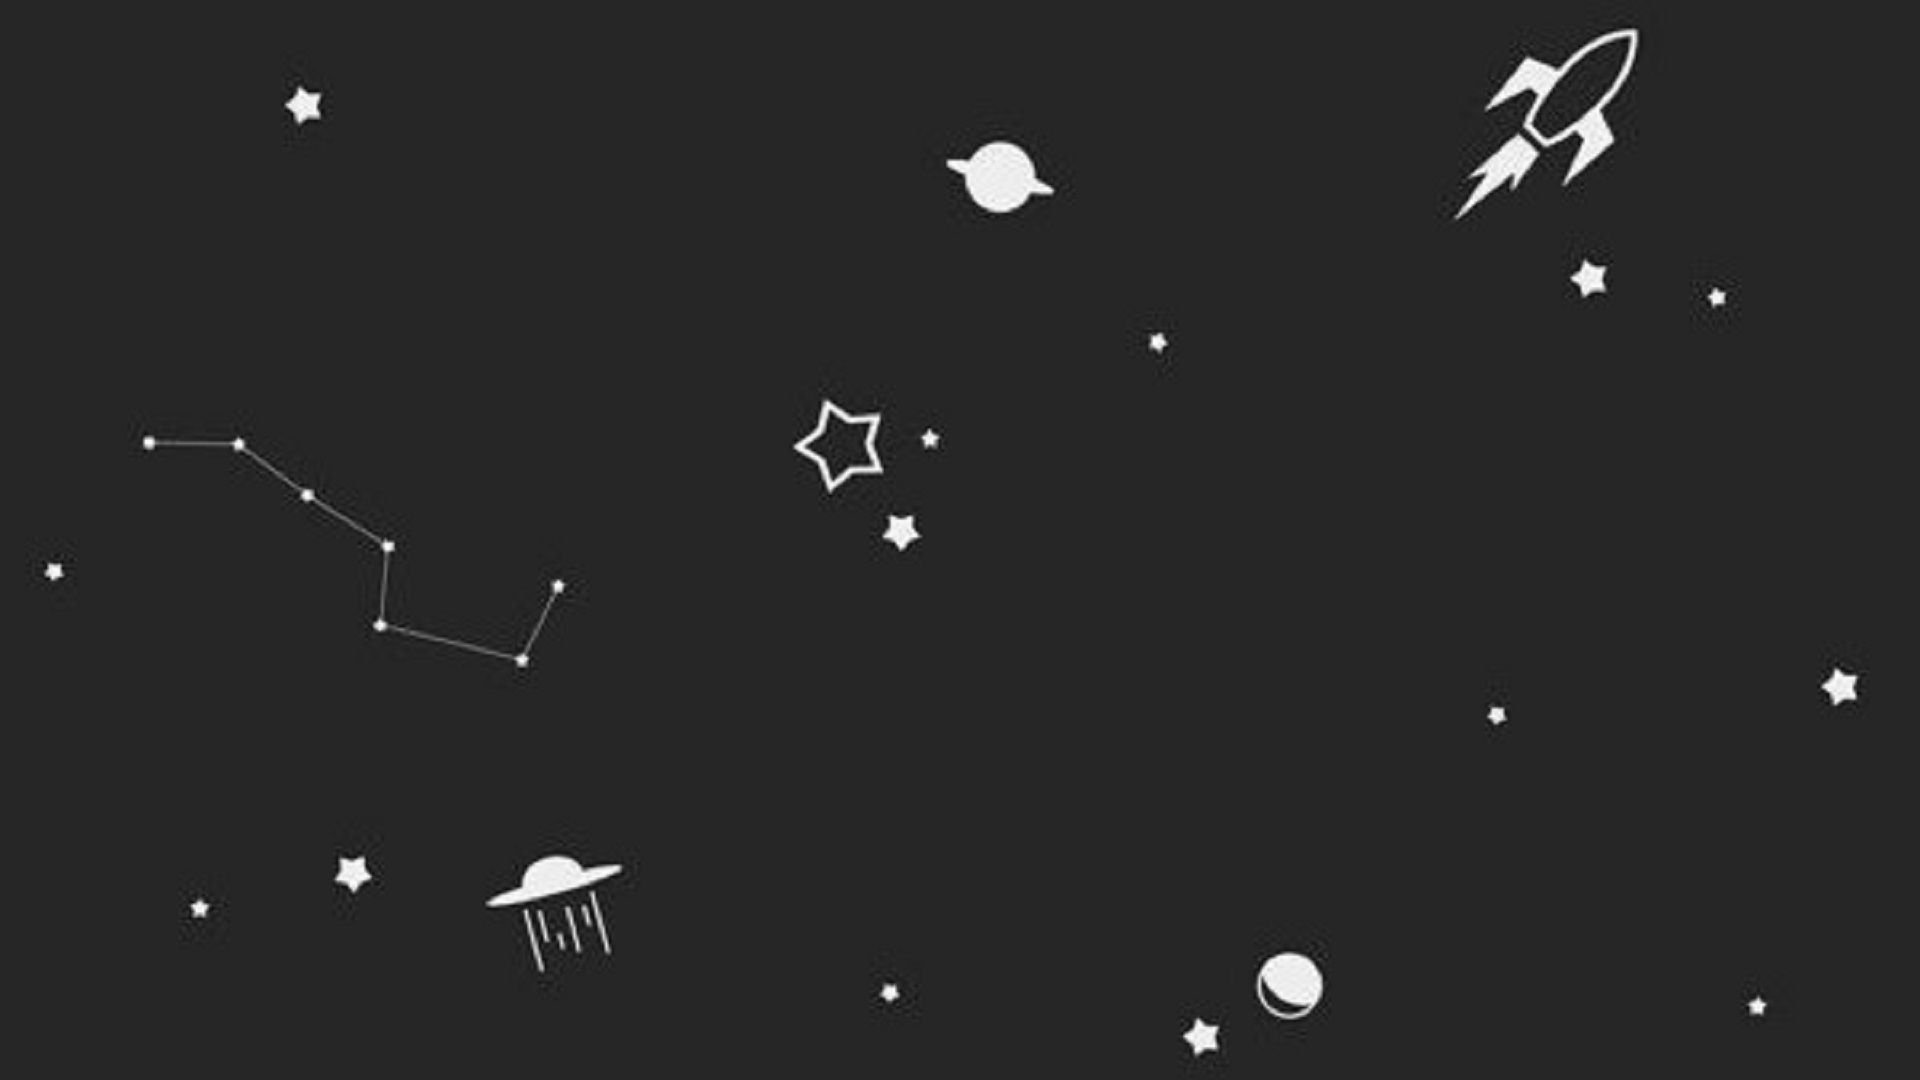 A black background with white stars, planets, a rocket ship and a shooting star. - Gray